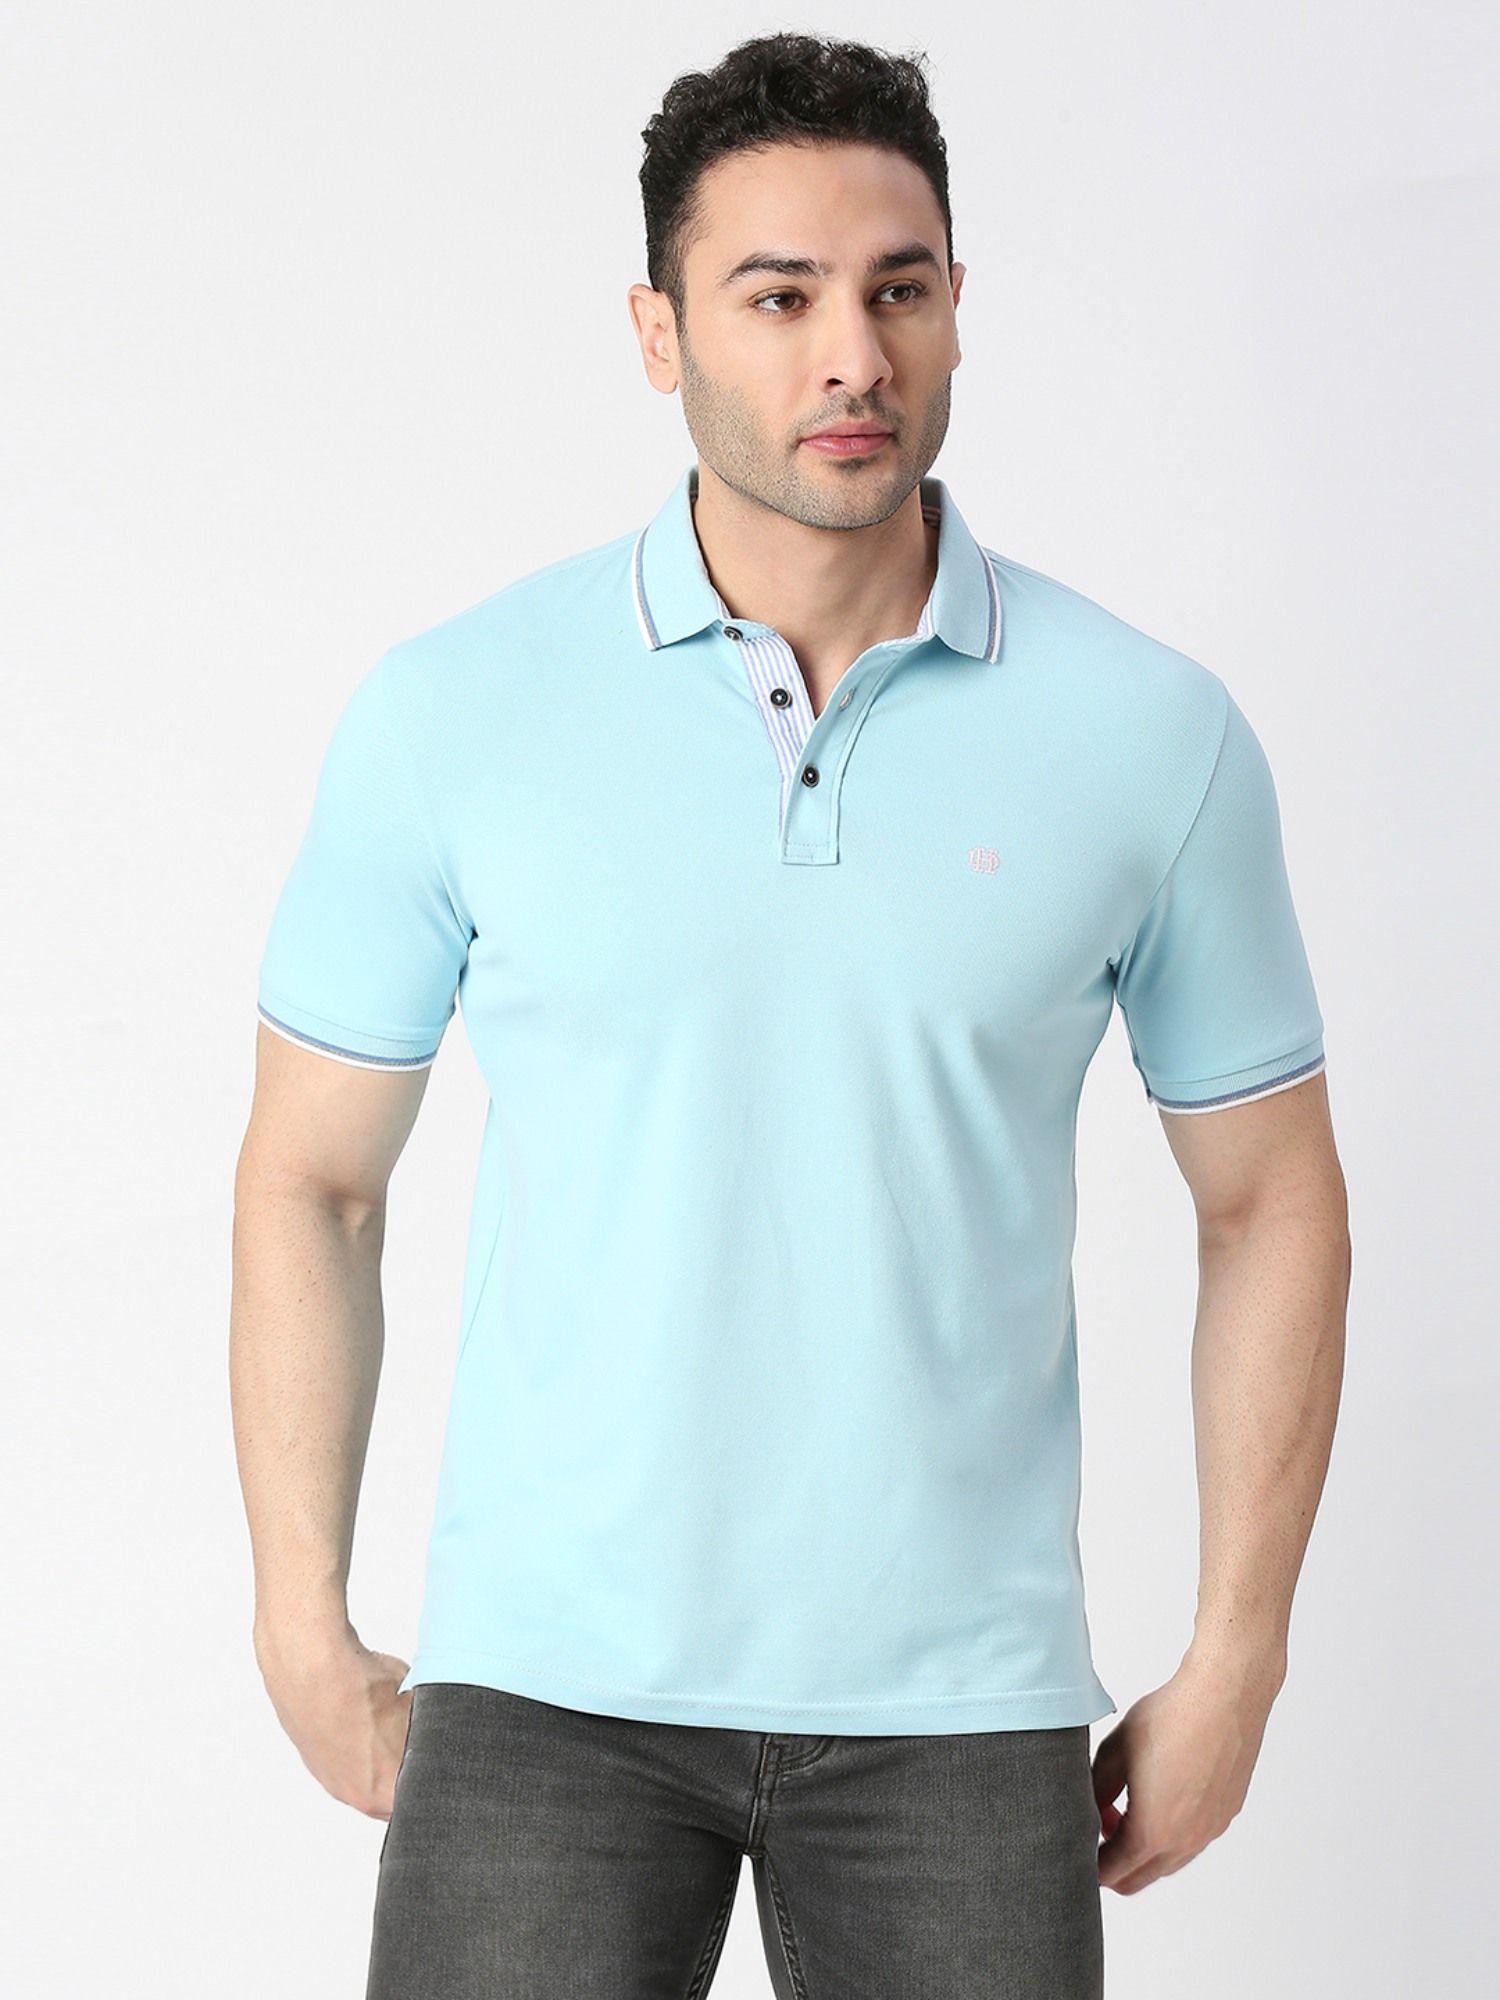 half sleeves sky blue pique lycra polo t-shirt with tipping collar